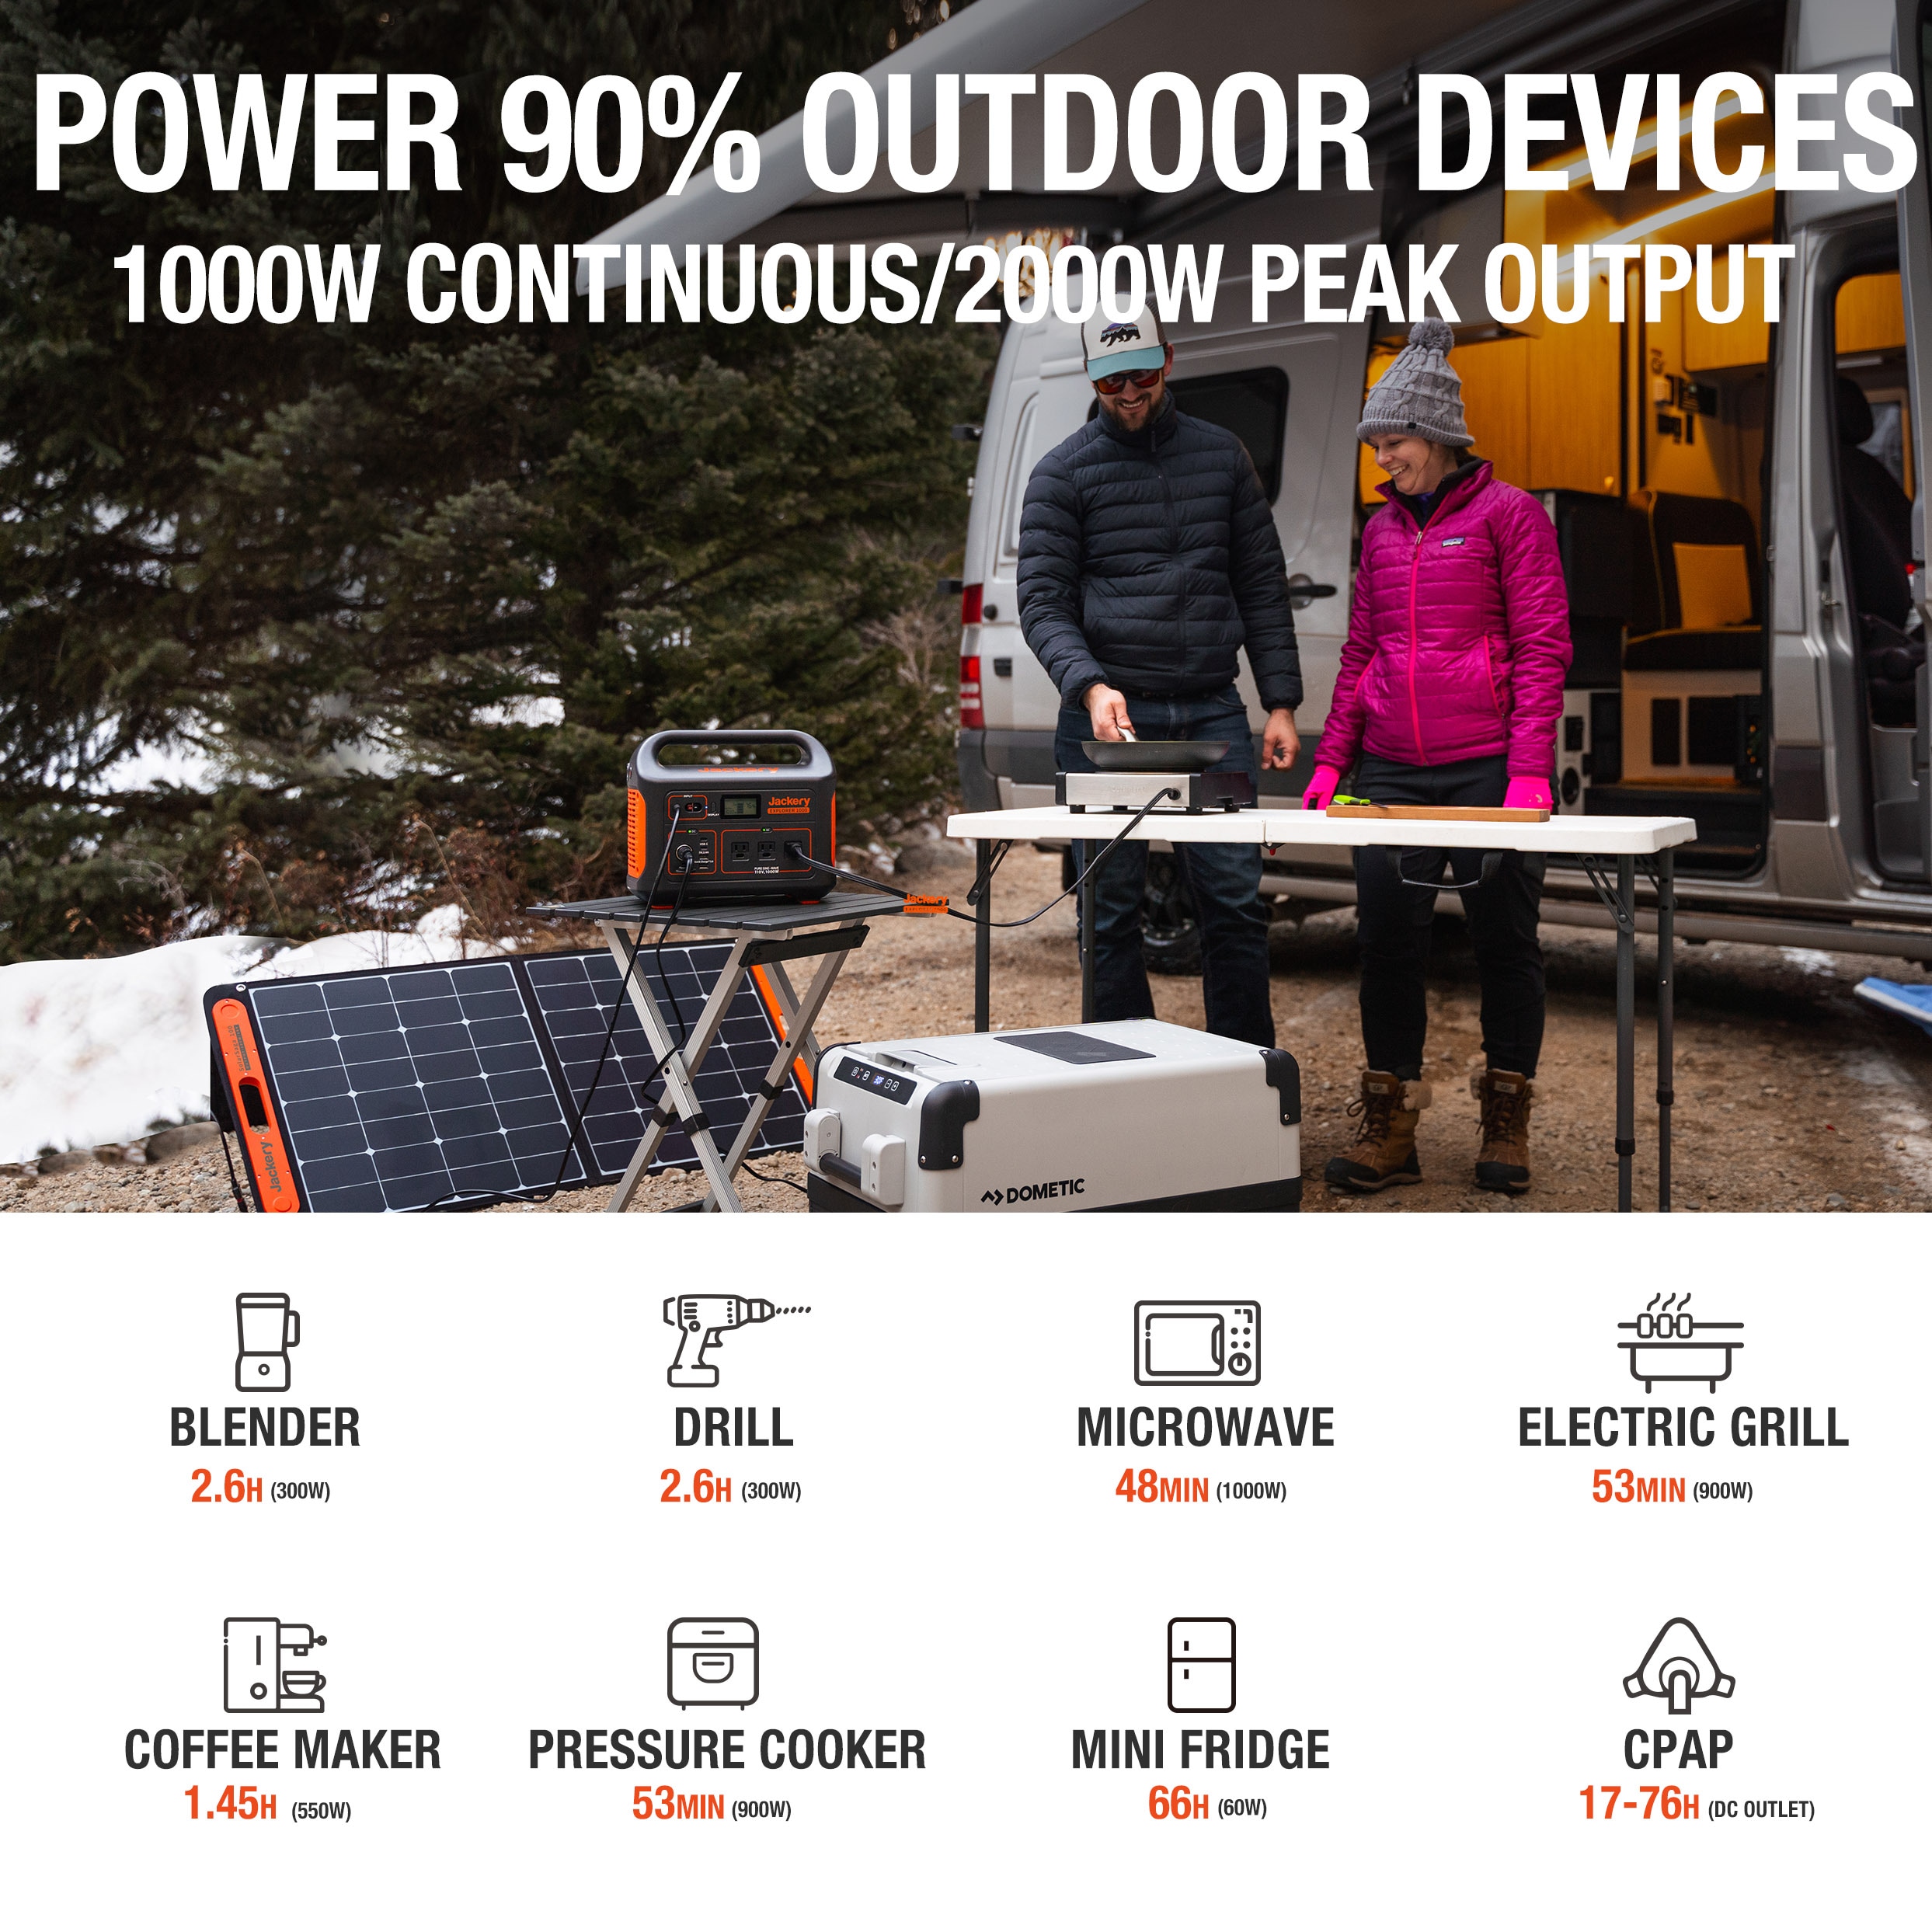  Jackery Explorer 1000 Portable Power Station, 1002Wh Capacity  with 3x1000W AC Outlets, Solar Generator for Home Backup, Emergency,  Outdoor Camping (Solar Panel Optional) : Patio, Lawn & Garden